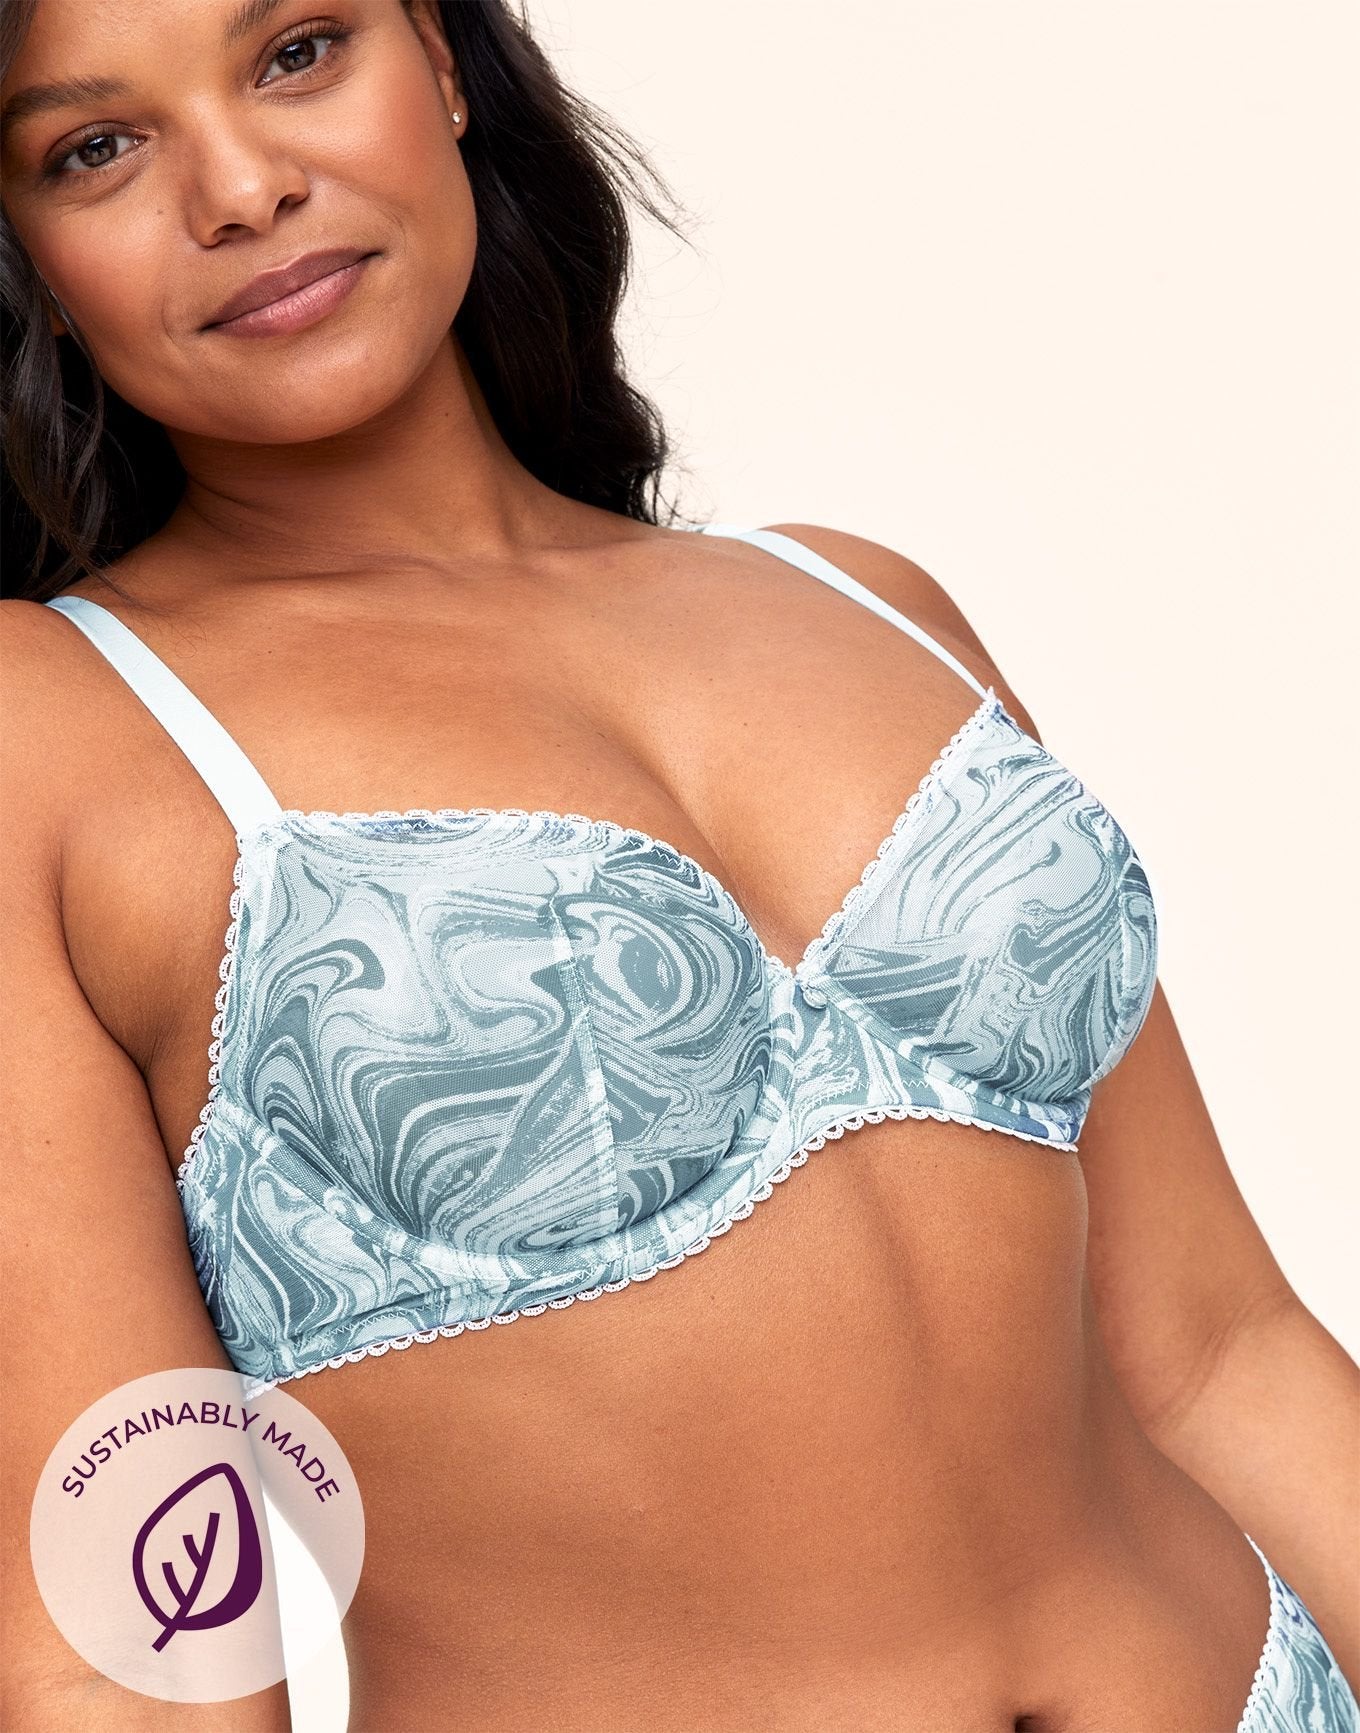 Adore Me Malina Unlined Demi in color Marbelous C07 and shape demi